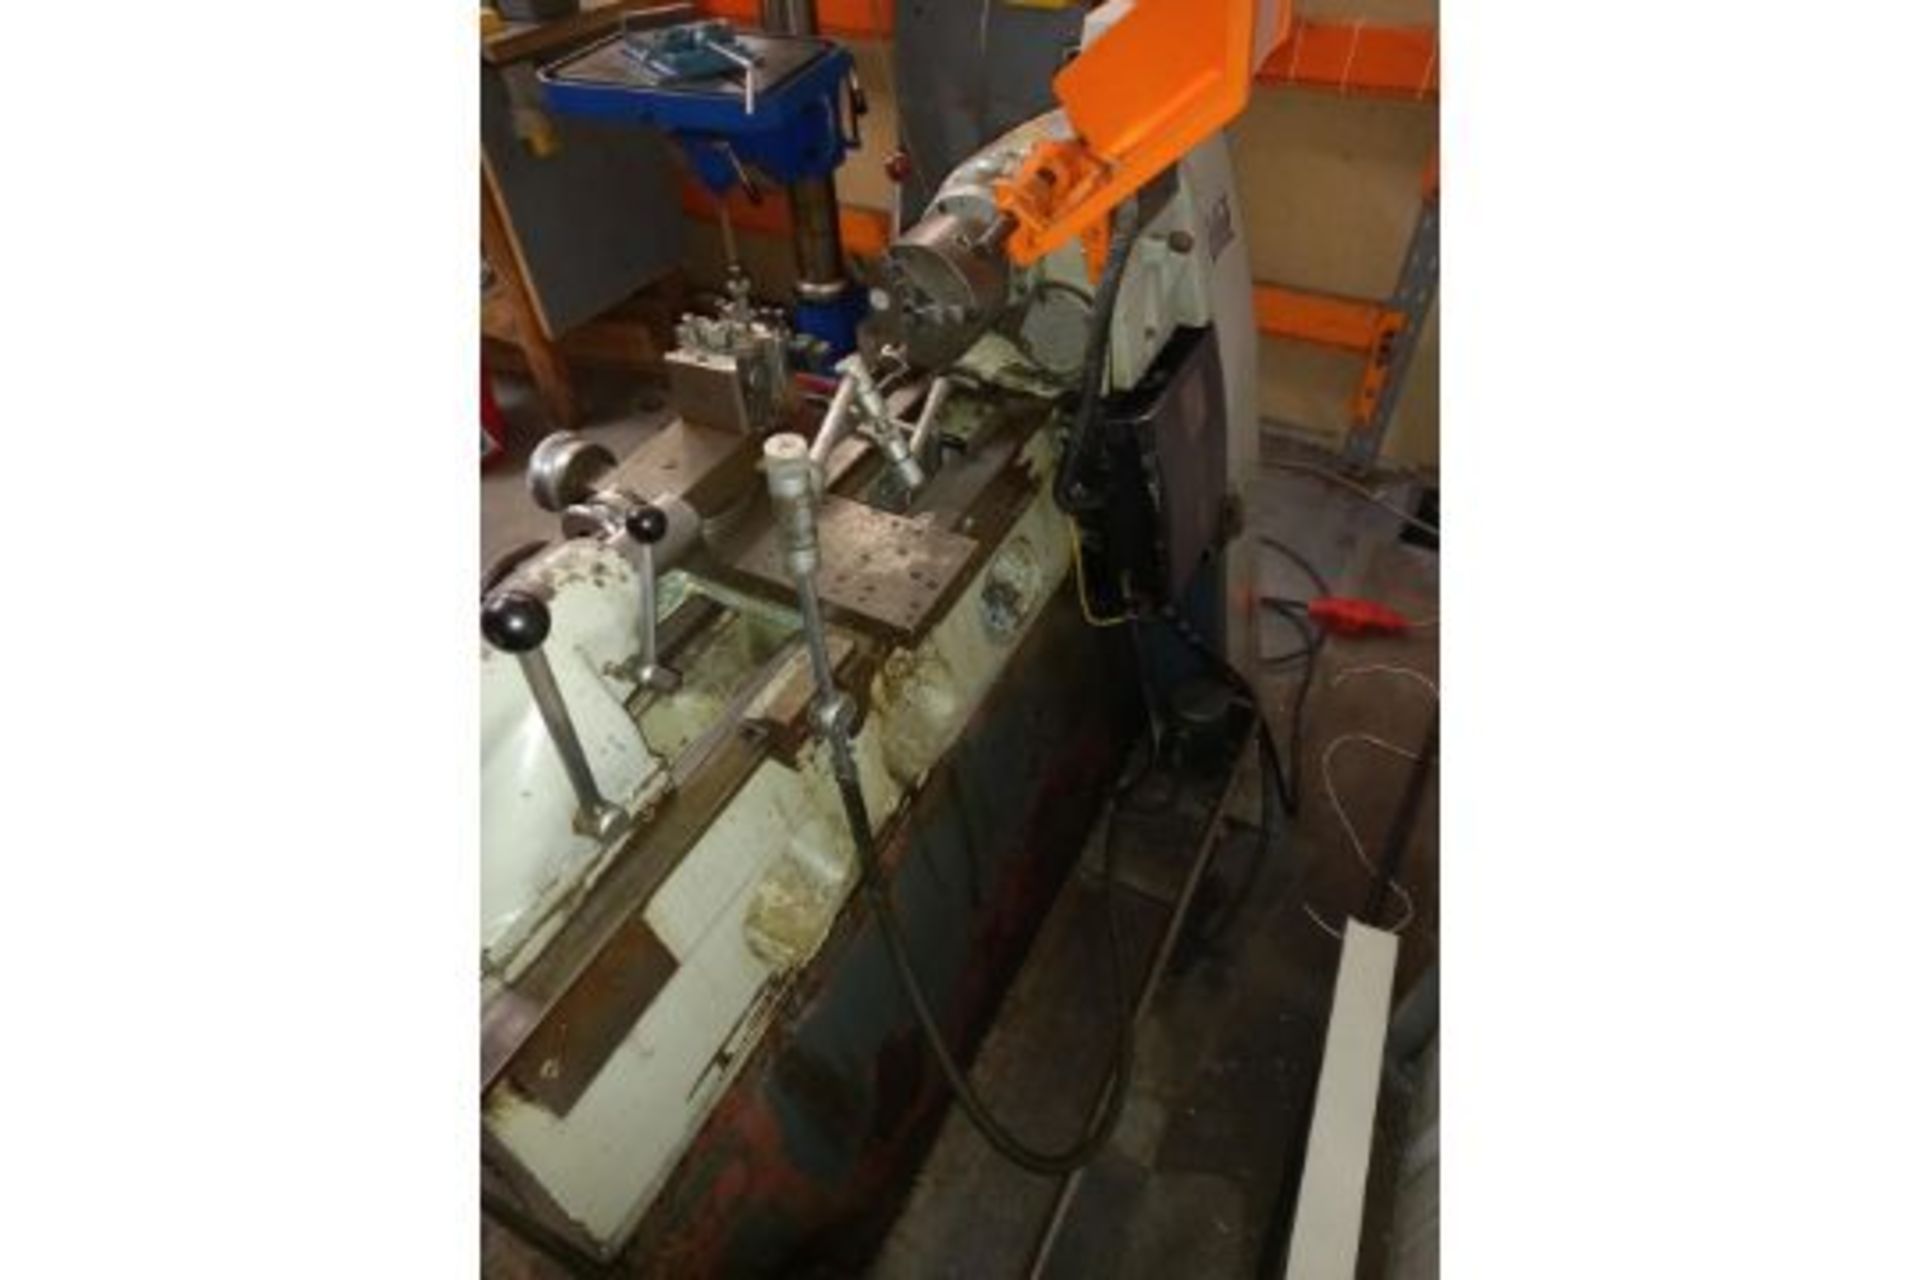 Colchester 5x20 Chipmaster Lathe - Image 12 of 18